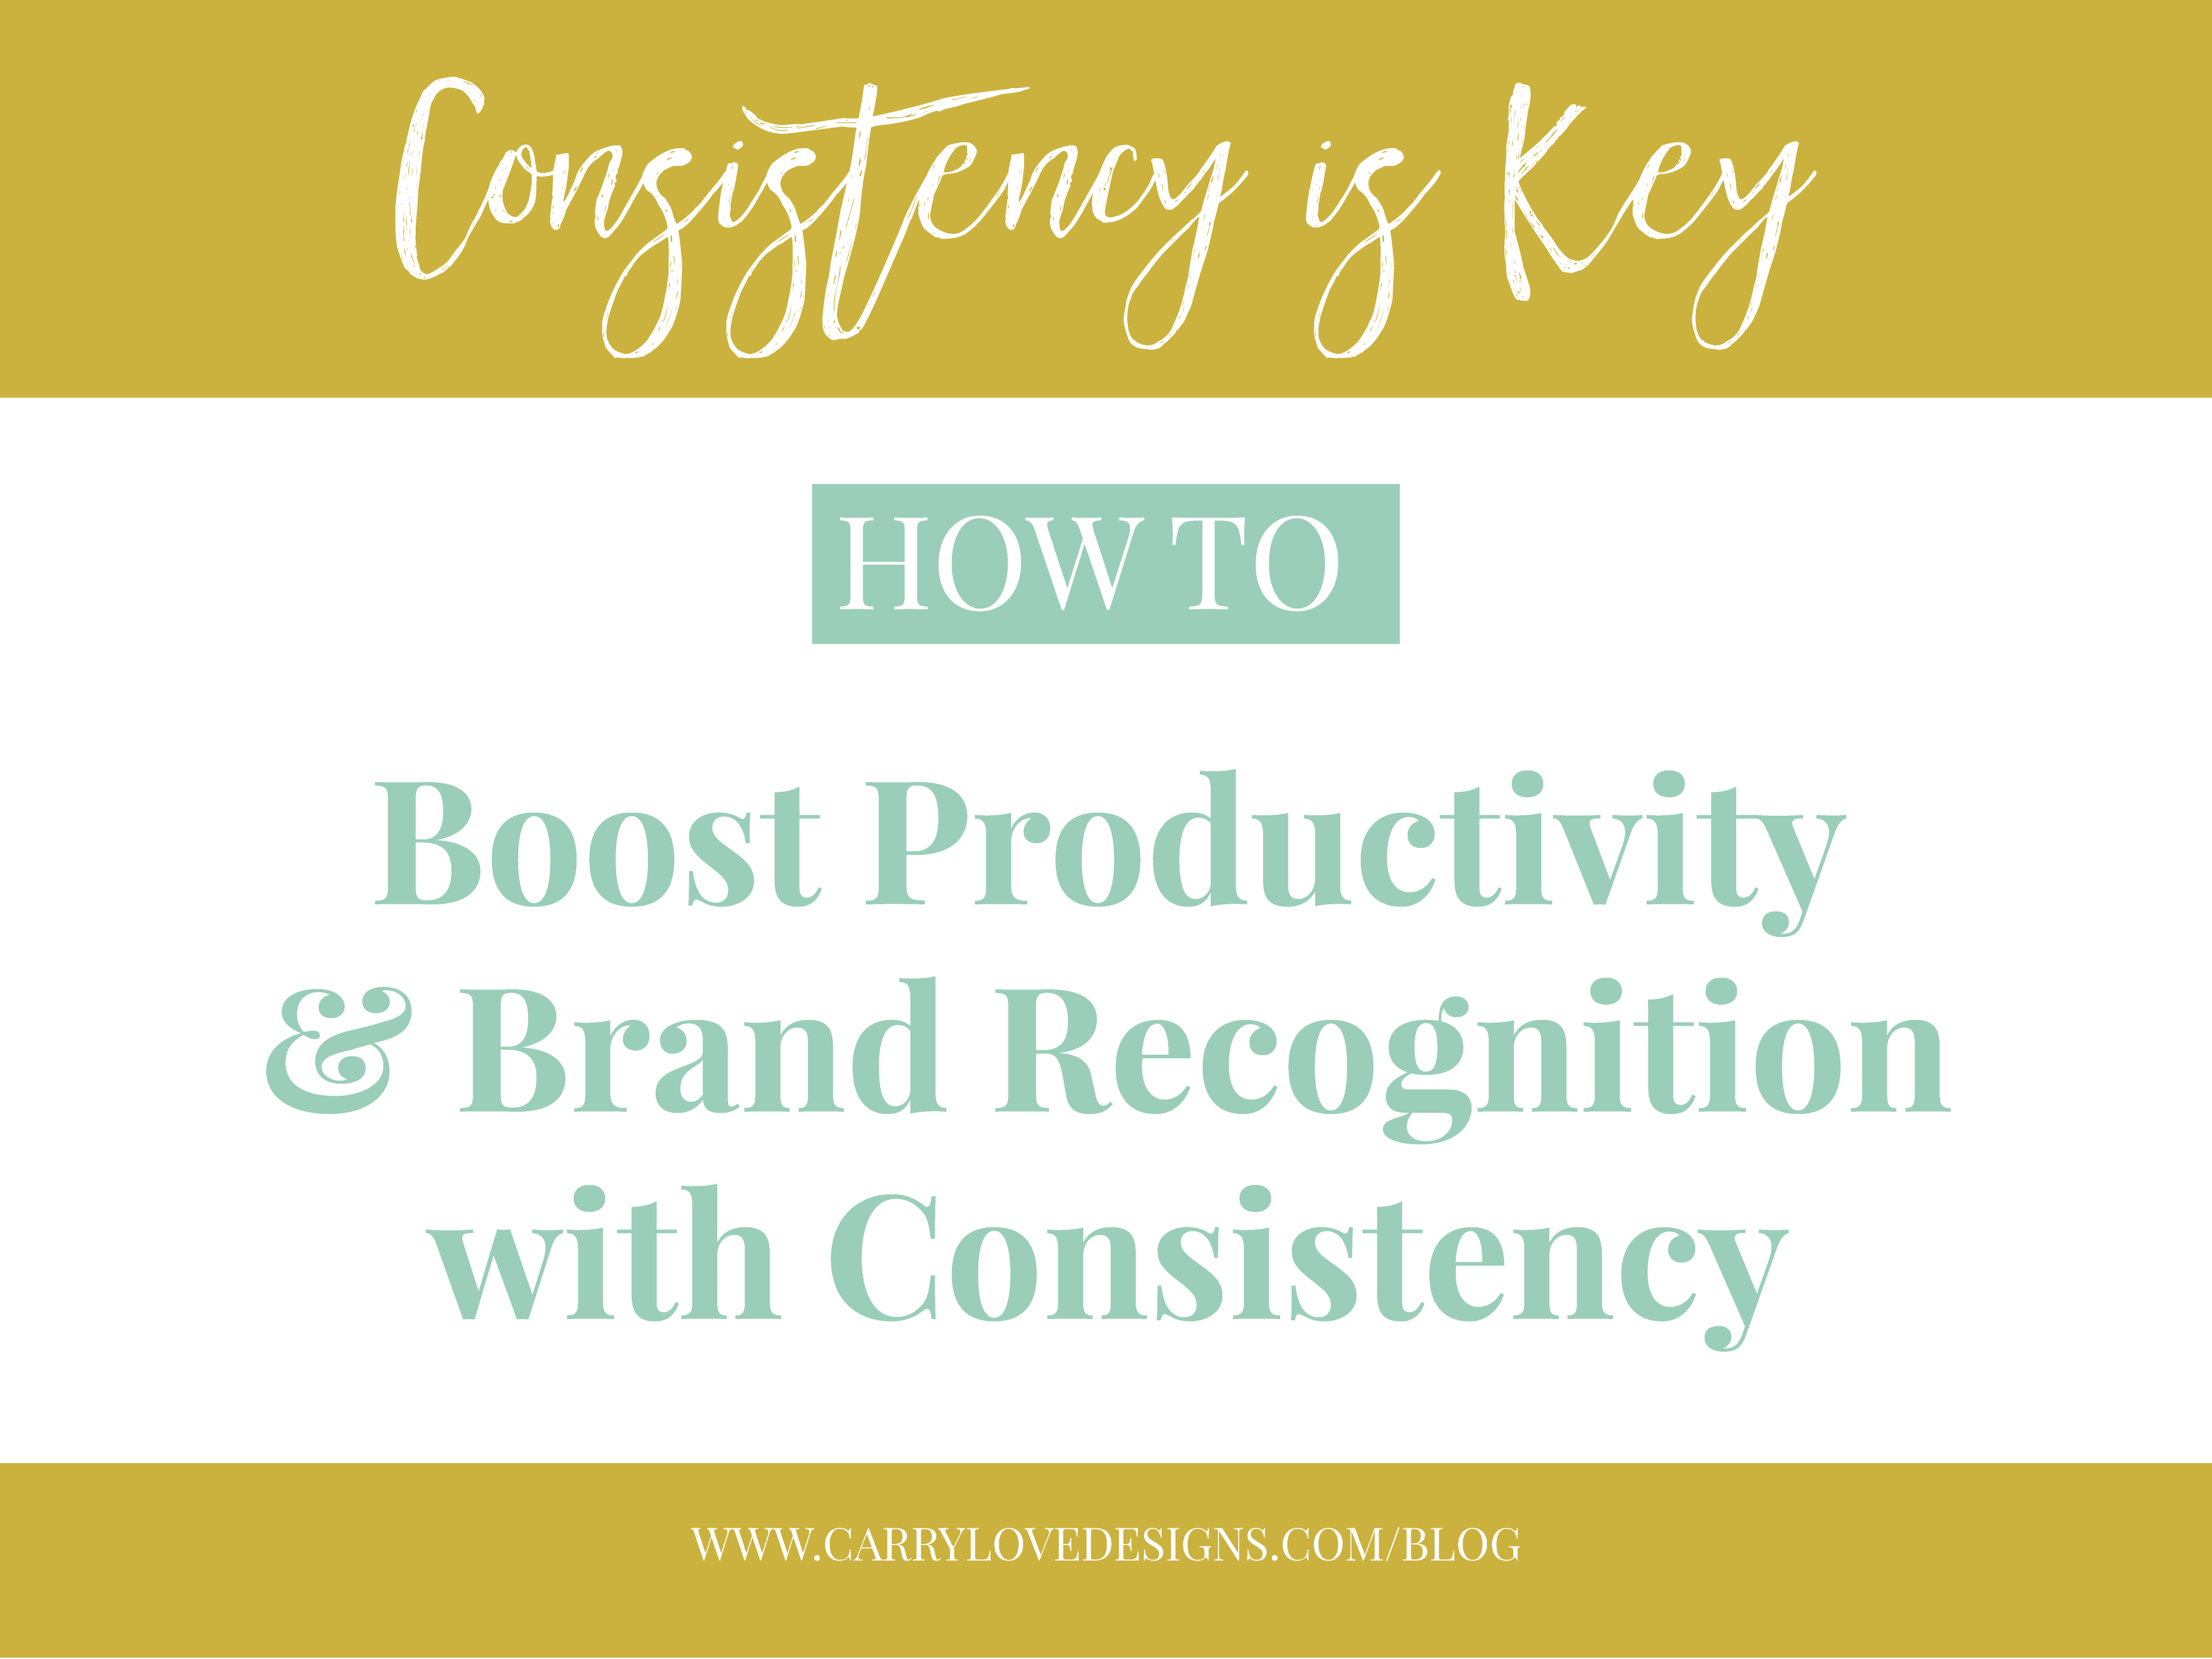 Consistency is Key: How To Boost Productivity and Brand Recognition with Consistency